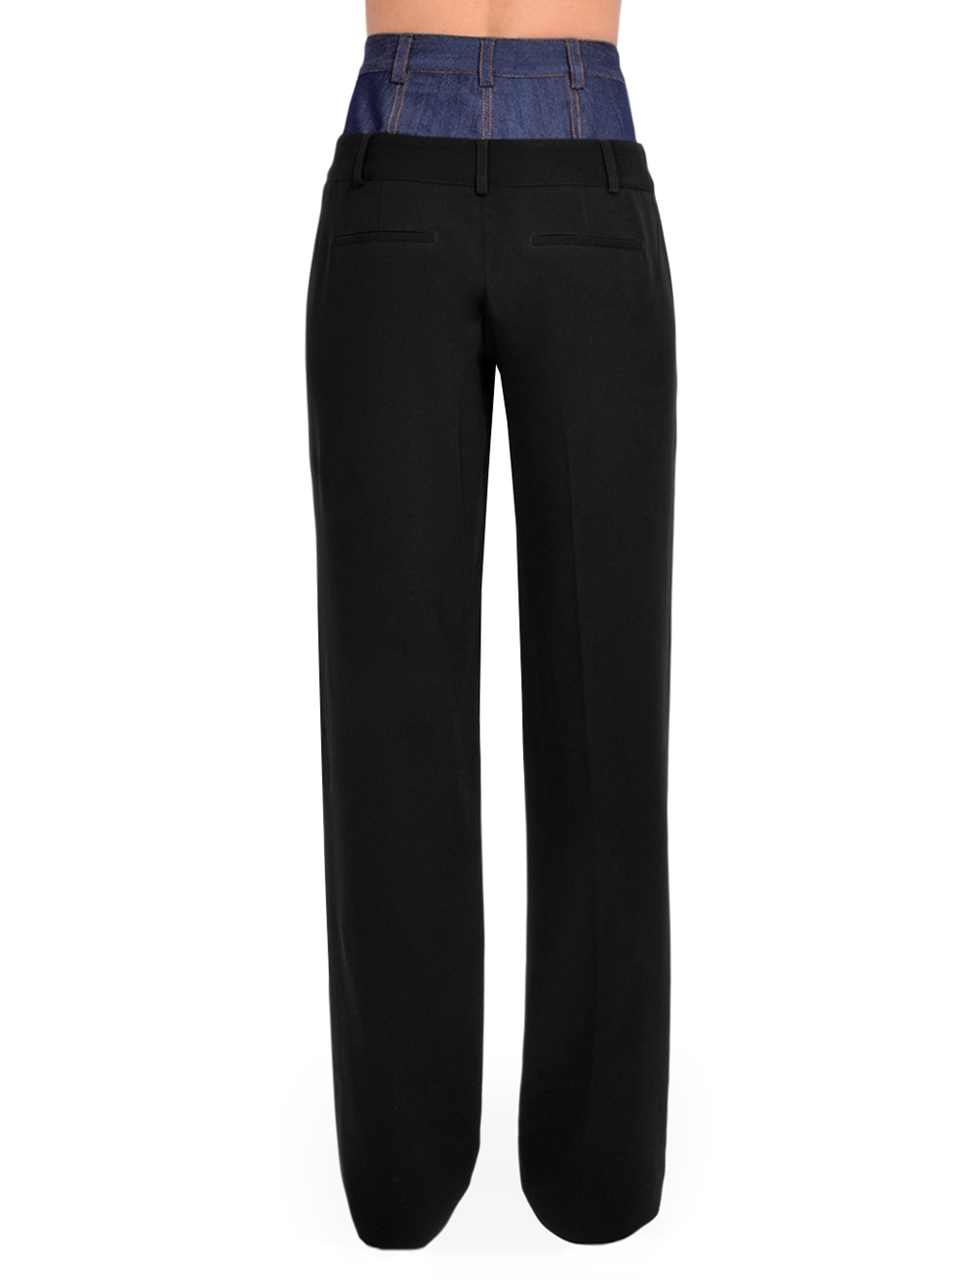 Cinq a Sept Dionne Mixed Media Straight Leg Pant in Black/ Indigo Back View 
